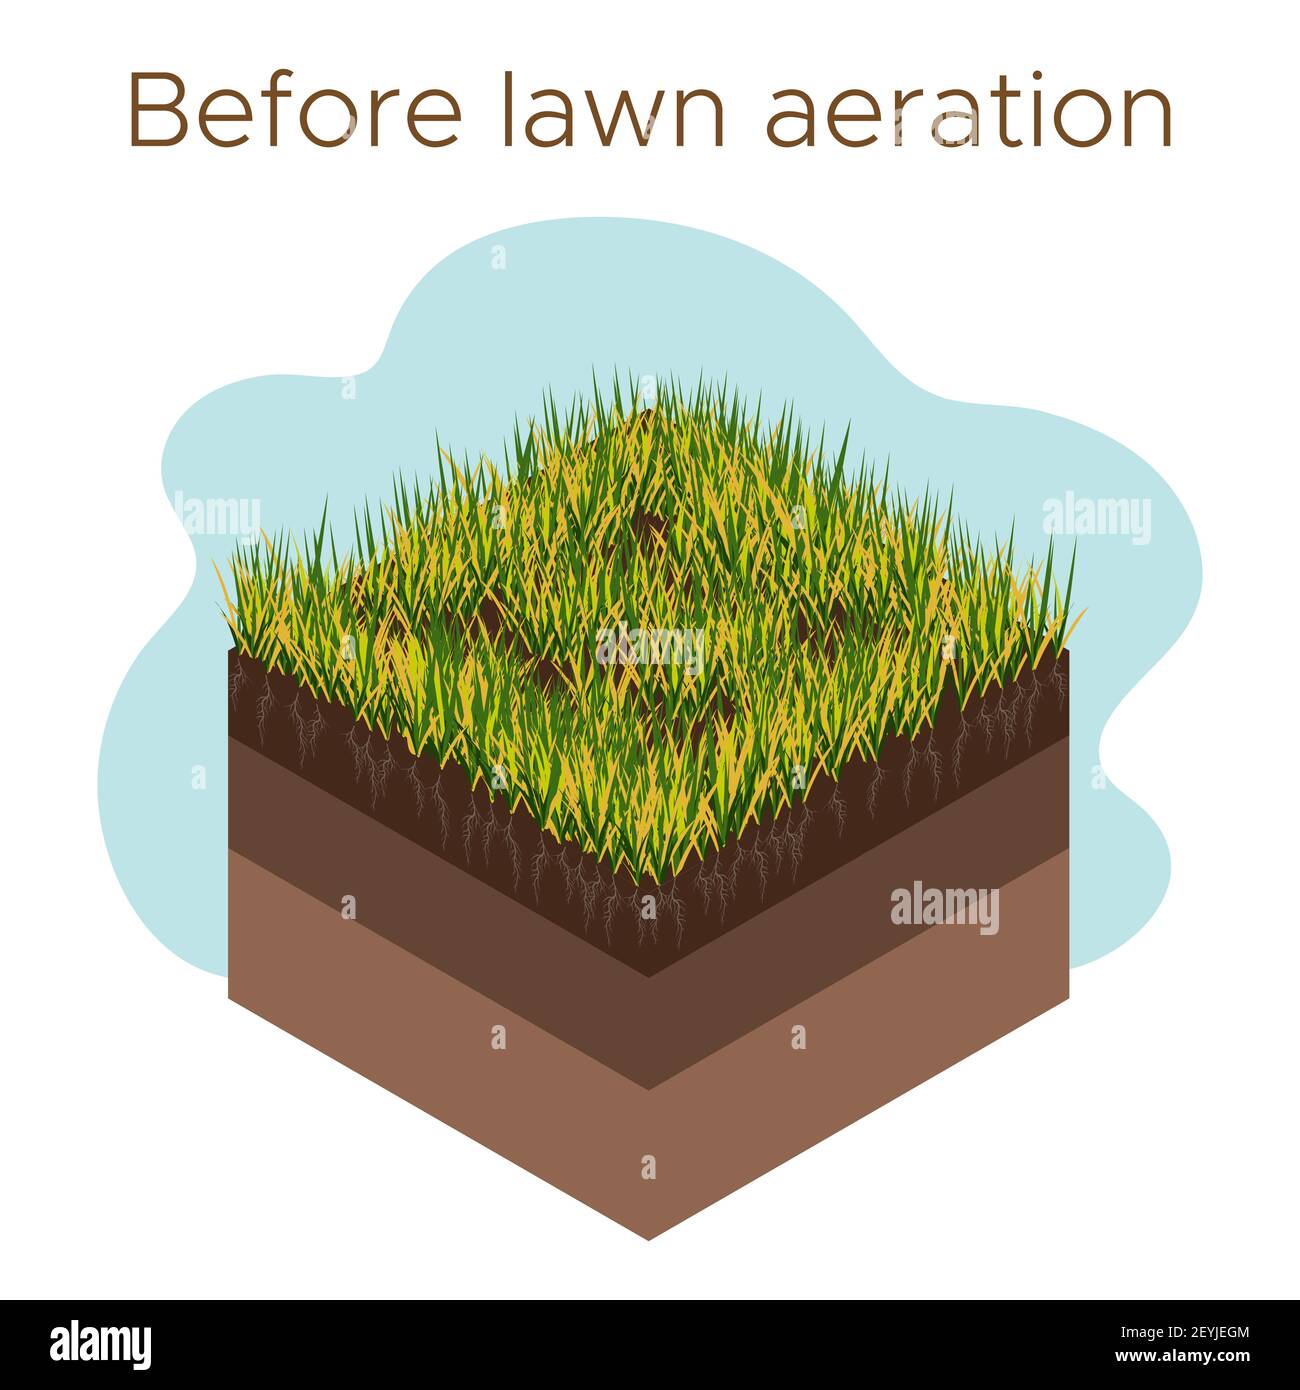 Lawn care - aeration and scarification. Labels by stage-before. Intake of substances-water, oxygen, and nutrients to feed the grass and soil. Vector i Stock Vector